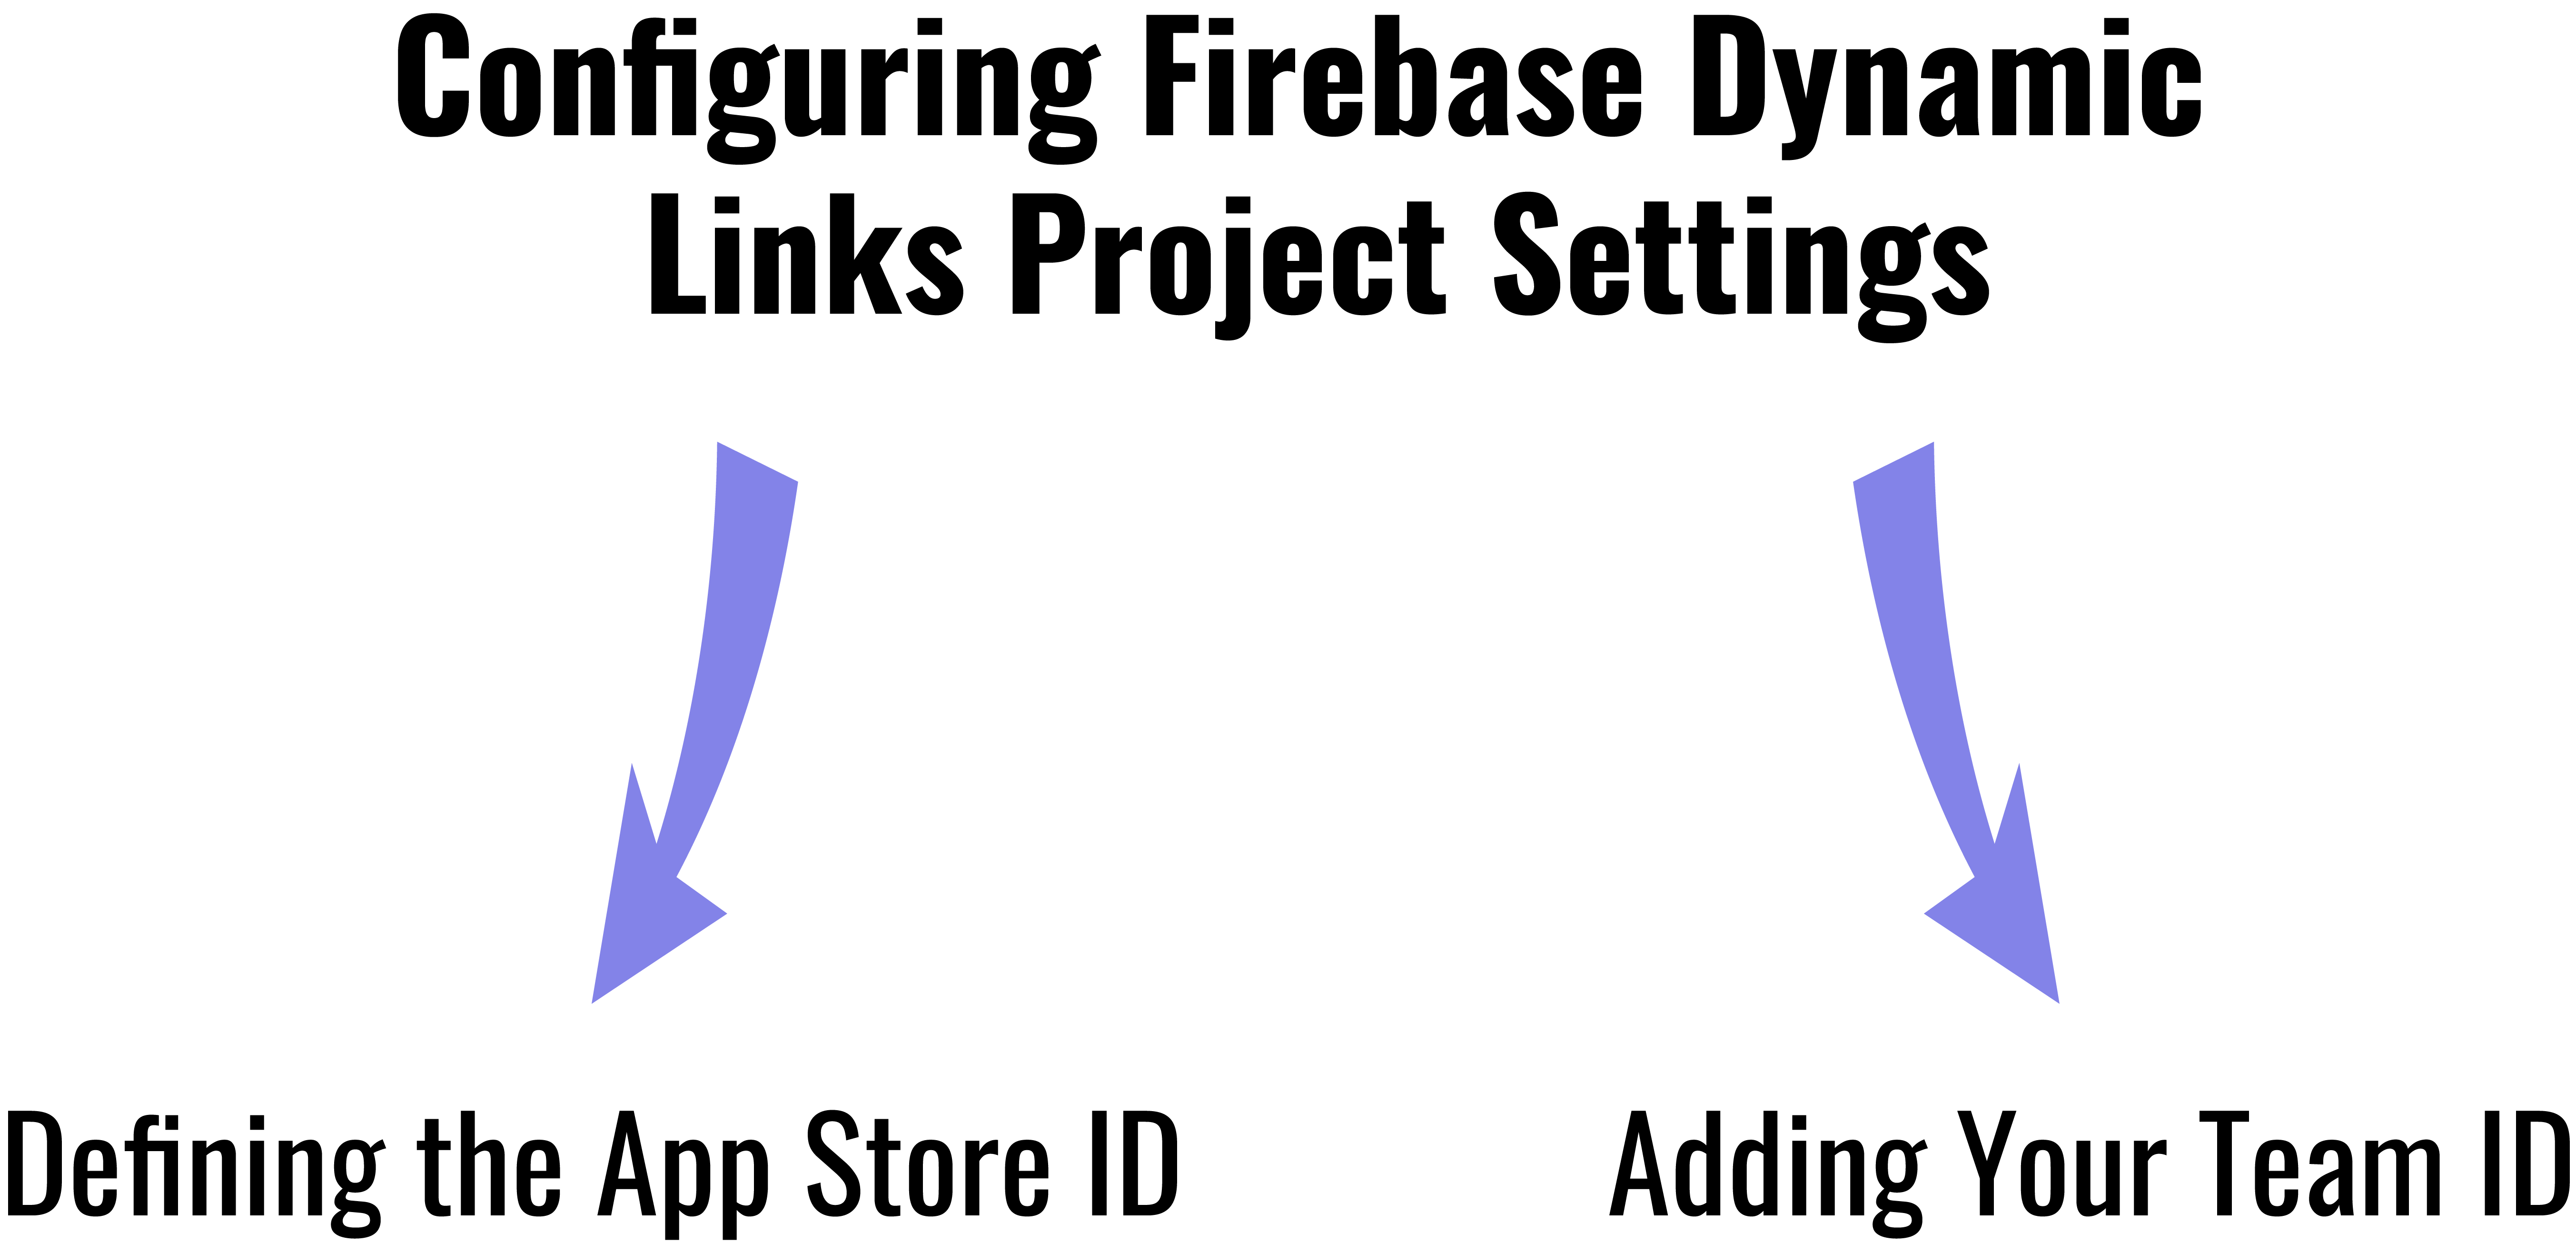 Configuring Firebase Dynamic Link Project Settings